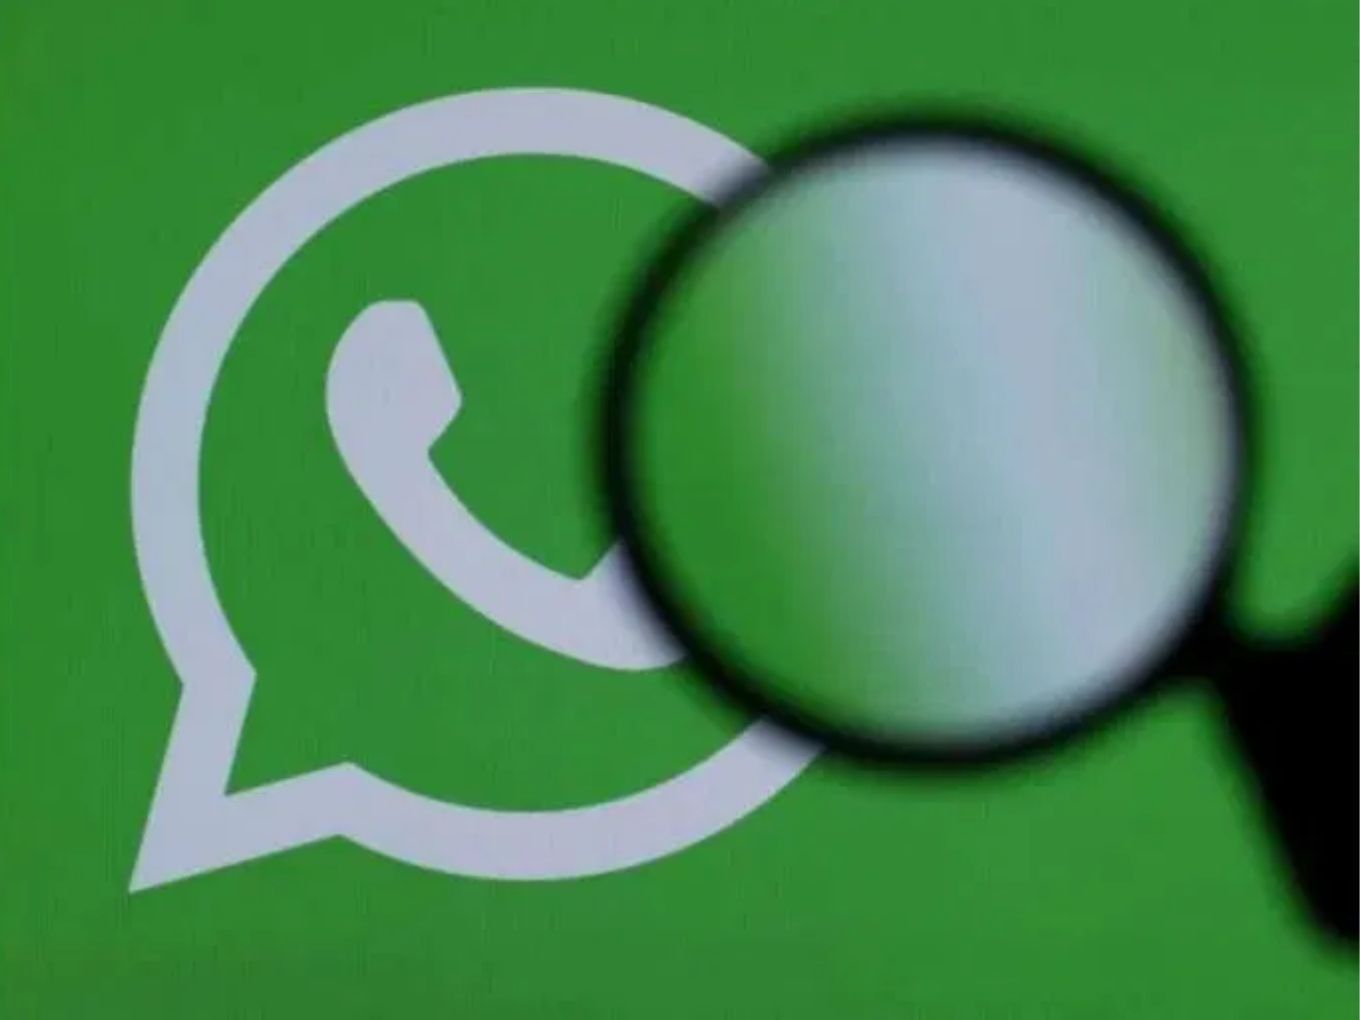 Amid Leaked Chats Of Bollywood Actors, WhatsApp Says Messages Are End-To-End Encrypted